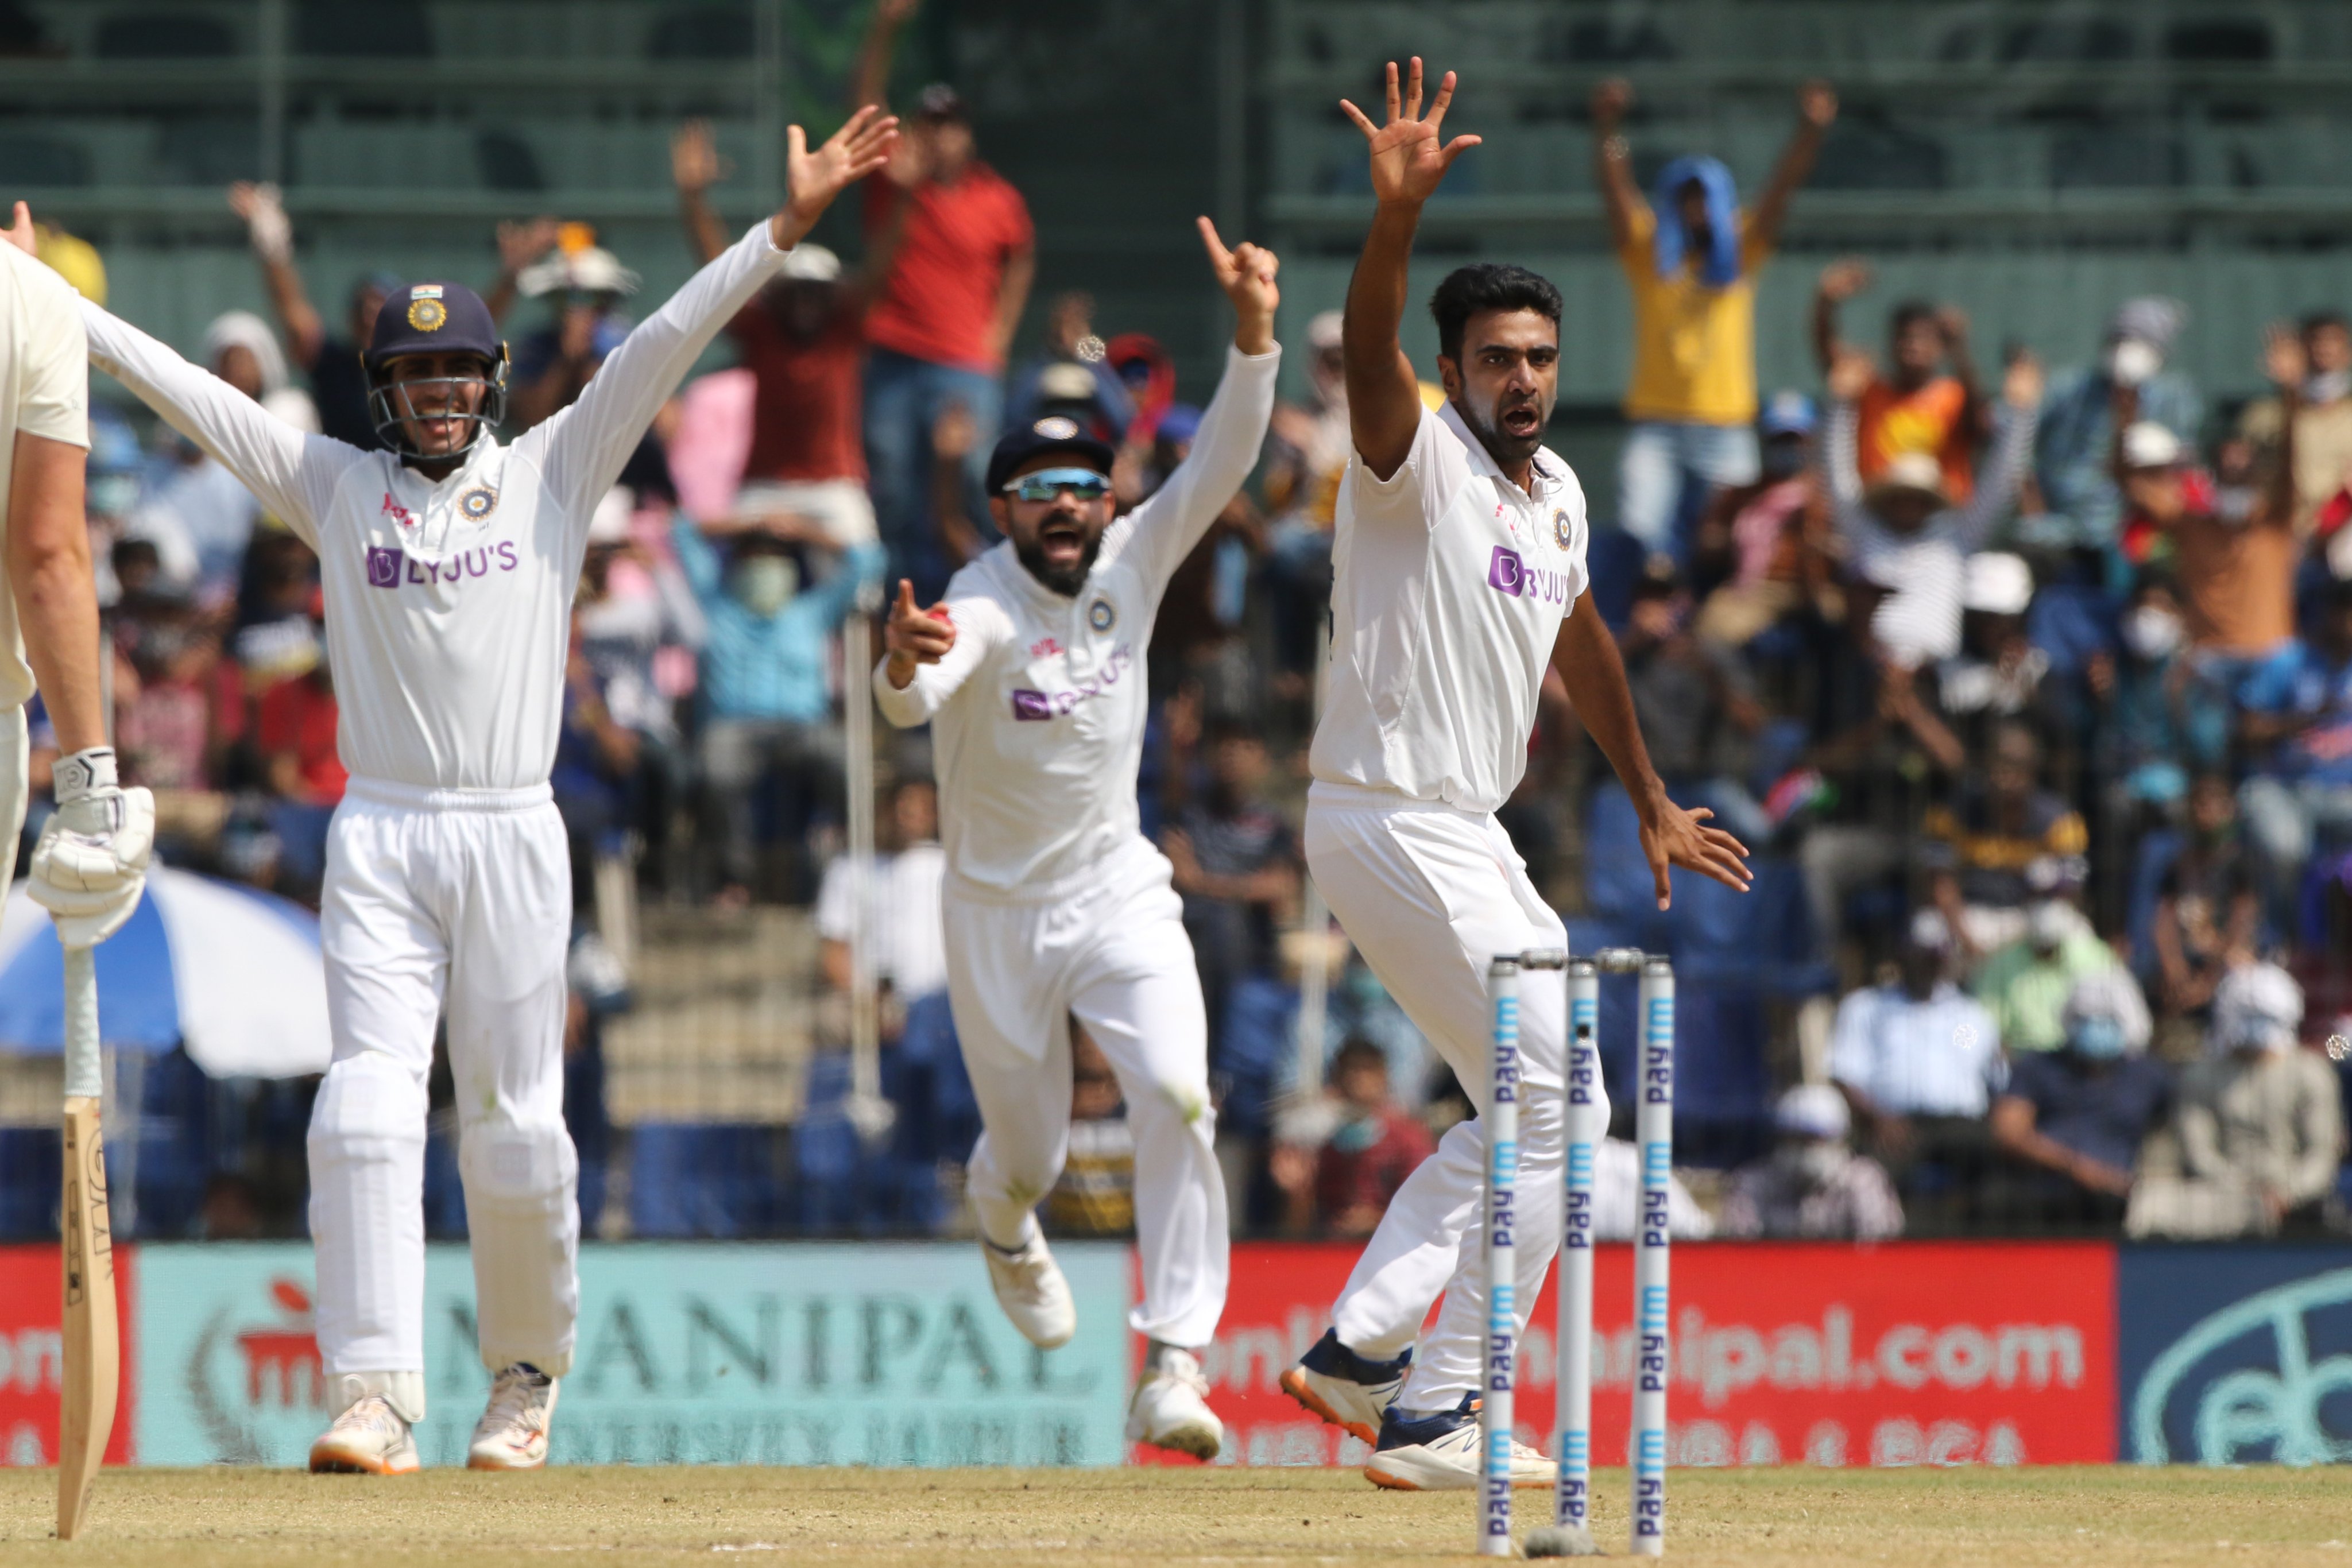 R Ashwin appealing during England's first innings of second Test | BCCI